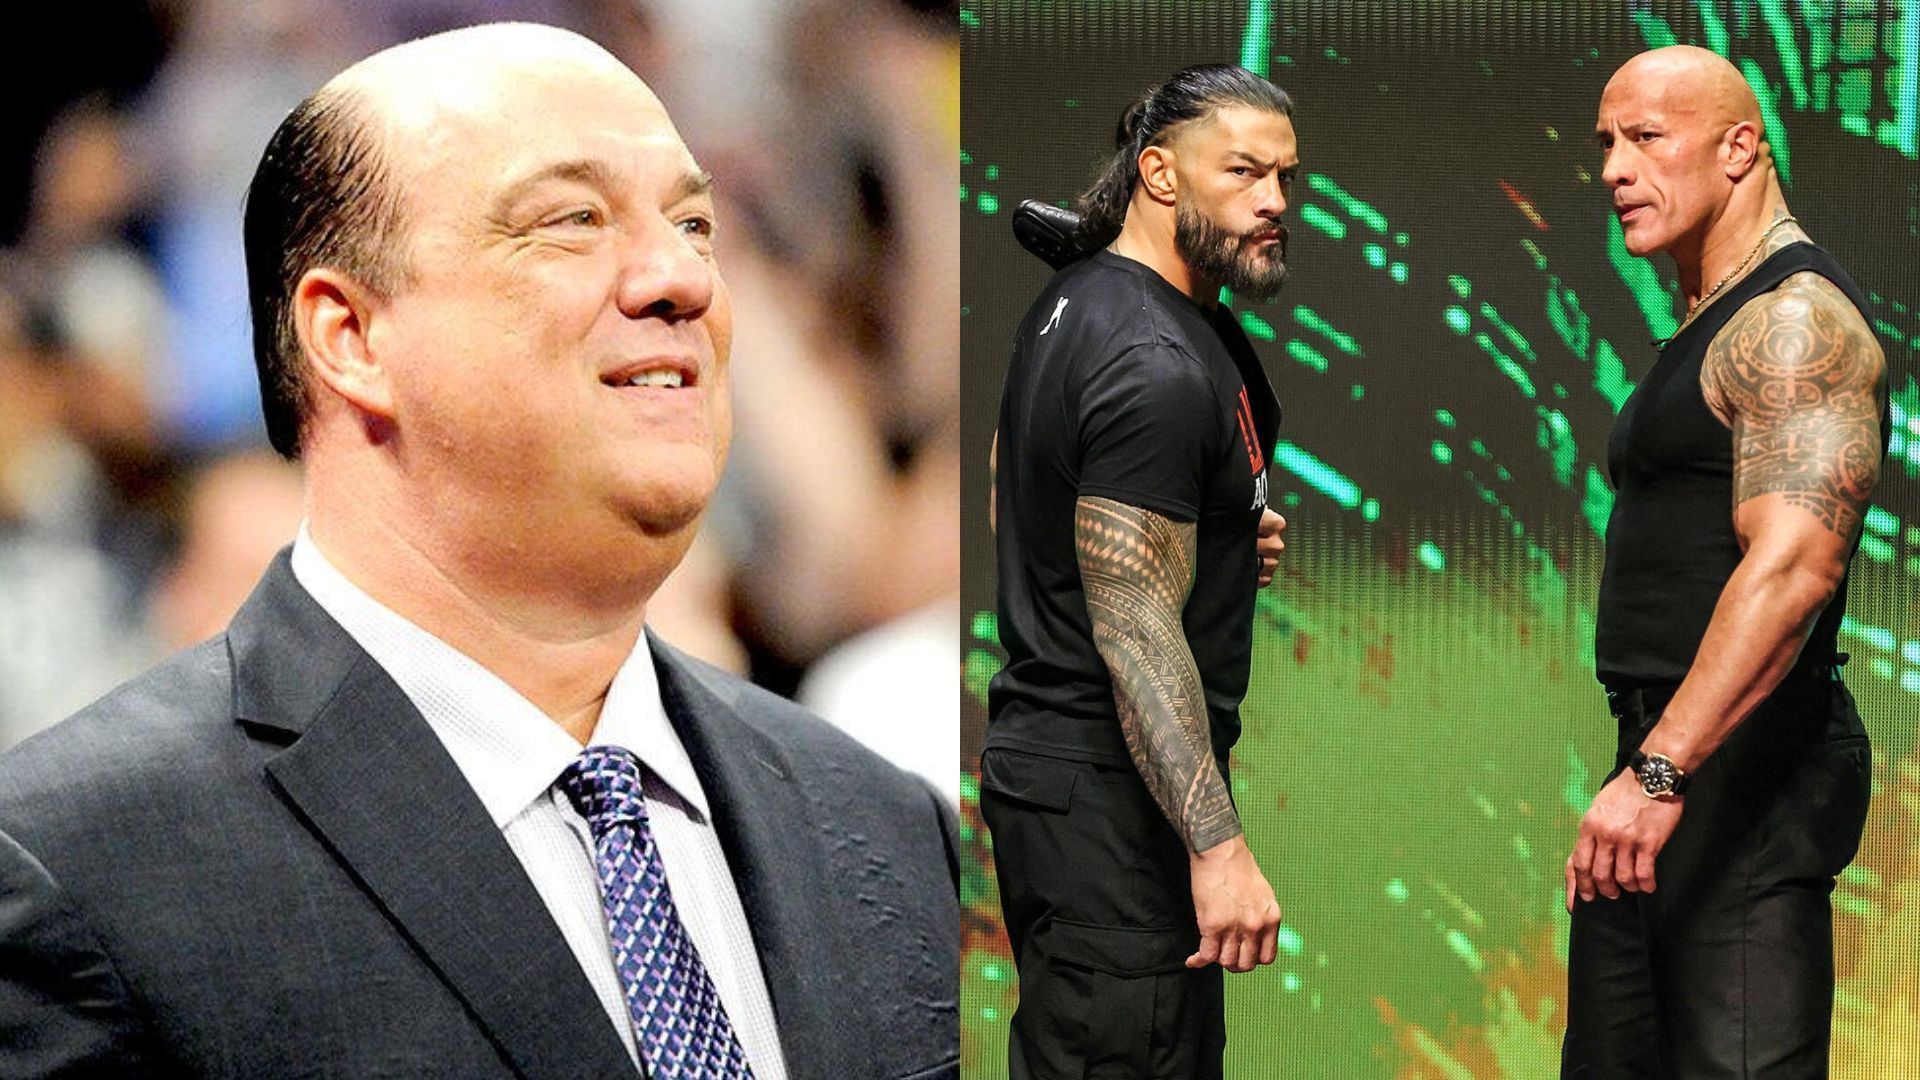 Paul Heyman (left); Roman Reigns and The Rock (right)